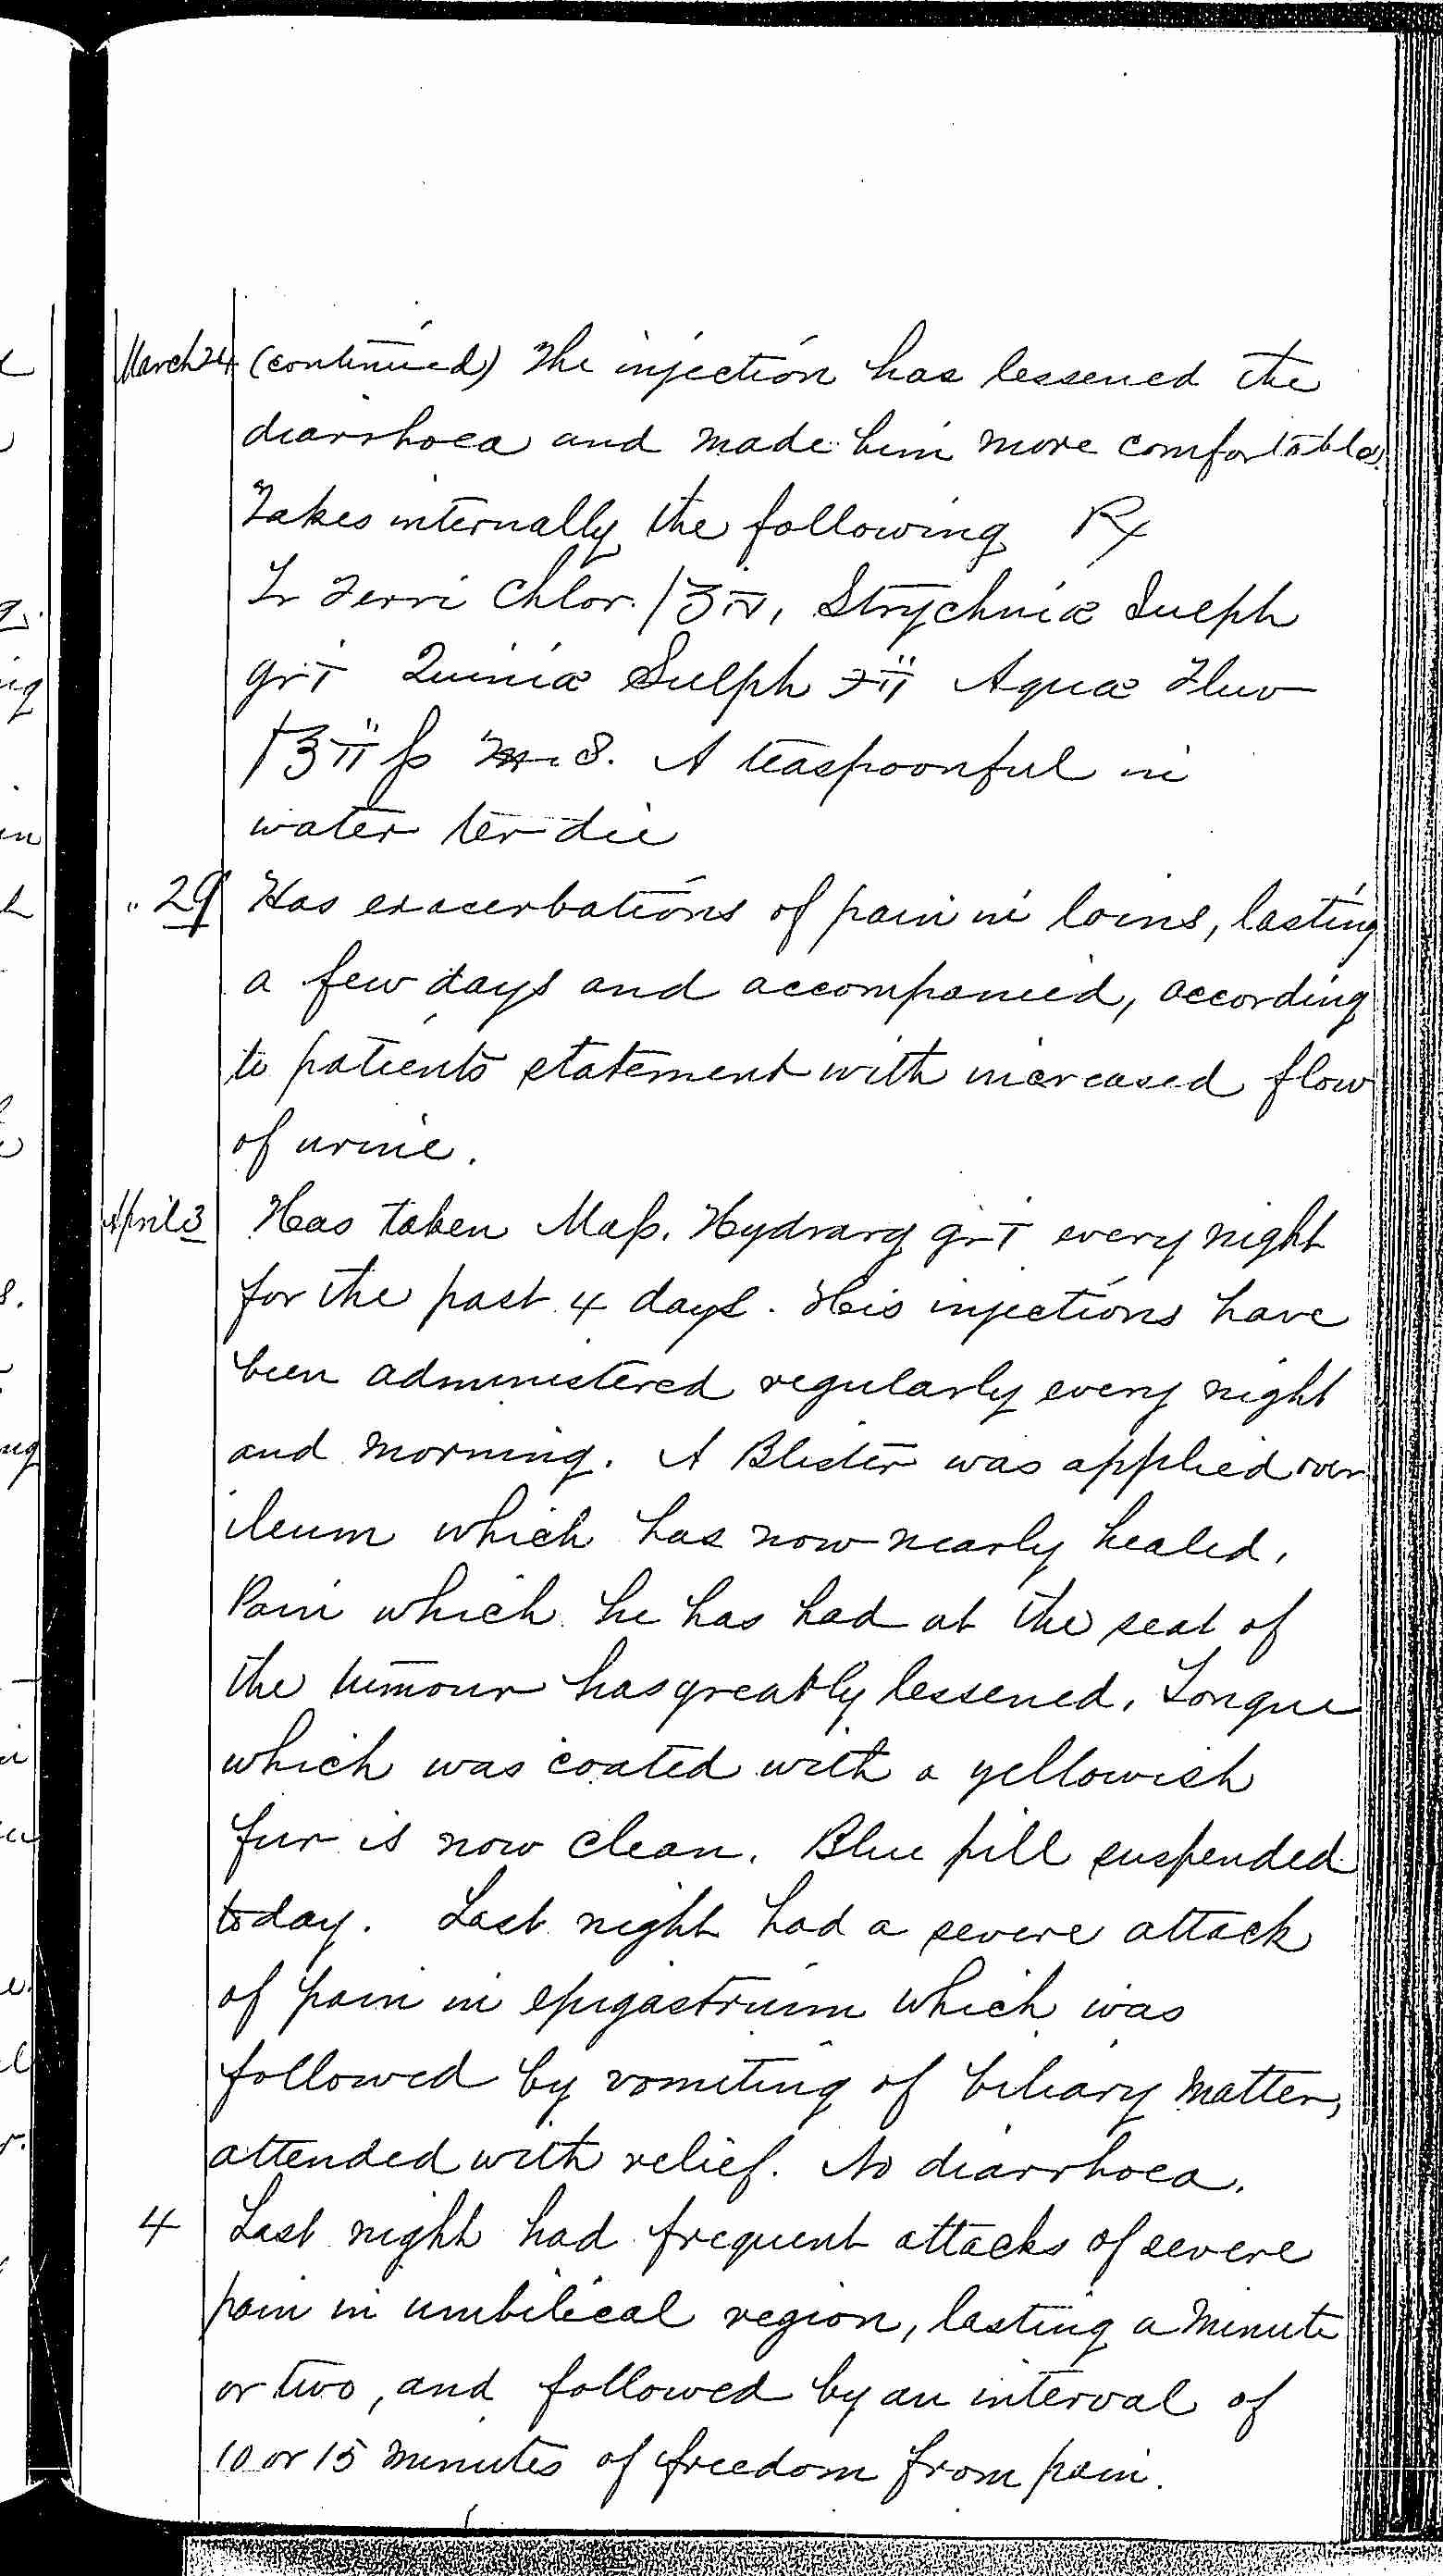 Entry for William Brady (page 3 of 5) in the log Hospital Tickets and Case Papers - Naval Hospital - Washington, D.C. - 1868-69